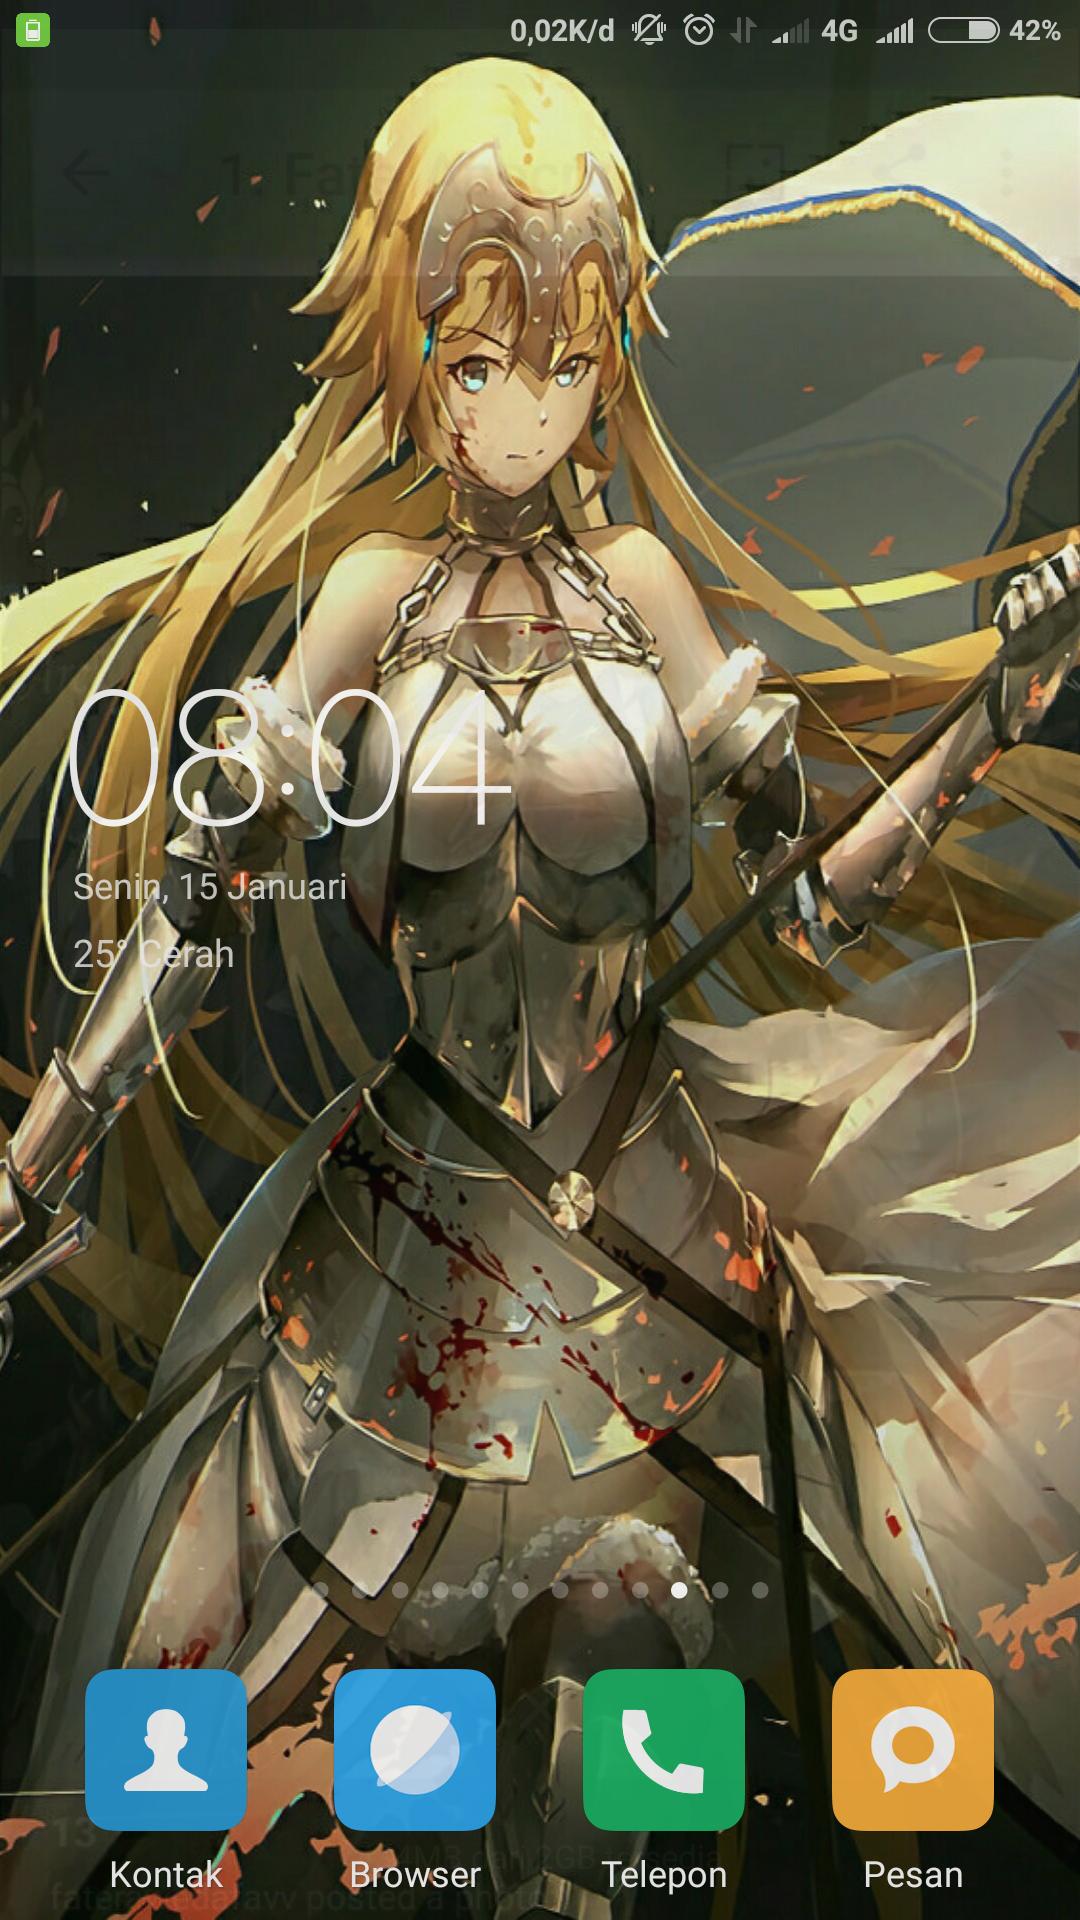 Wallpapers Anime Hd Fate Apocrypha For Android Apk Download